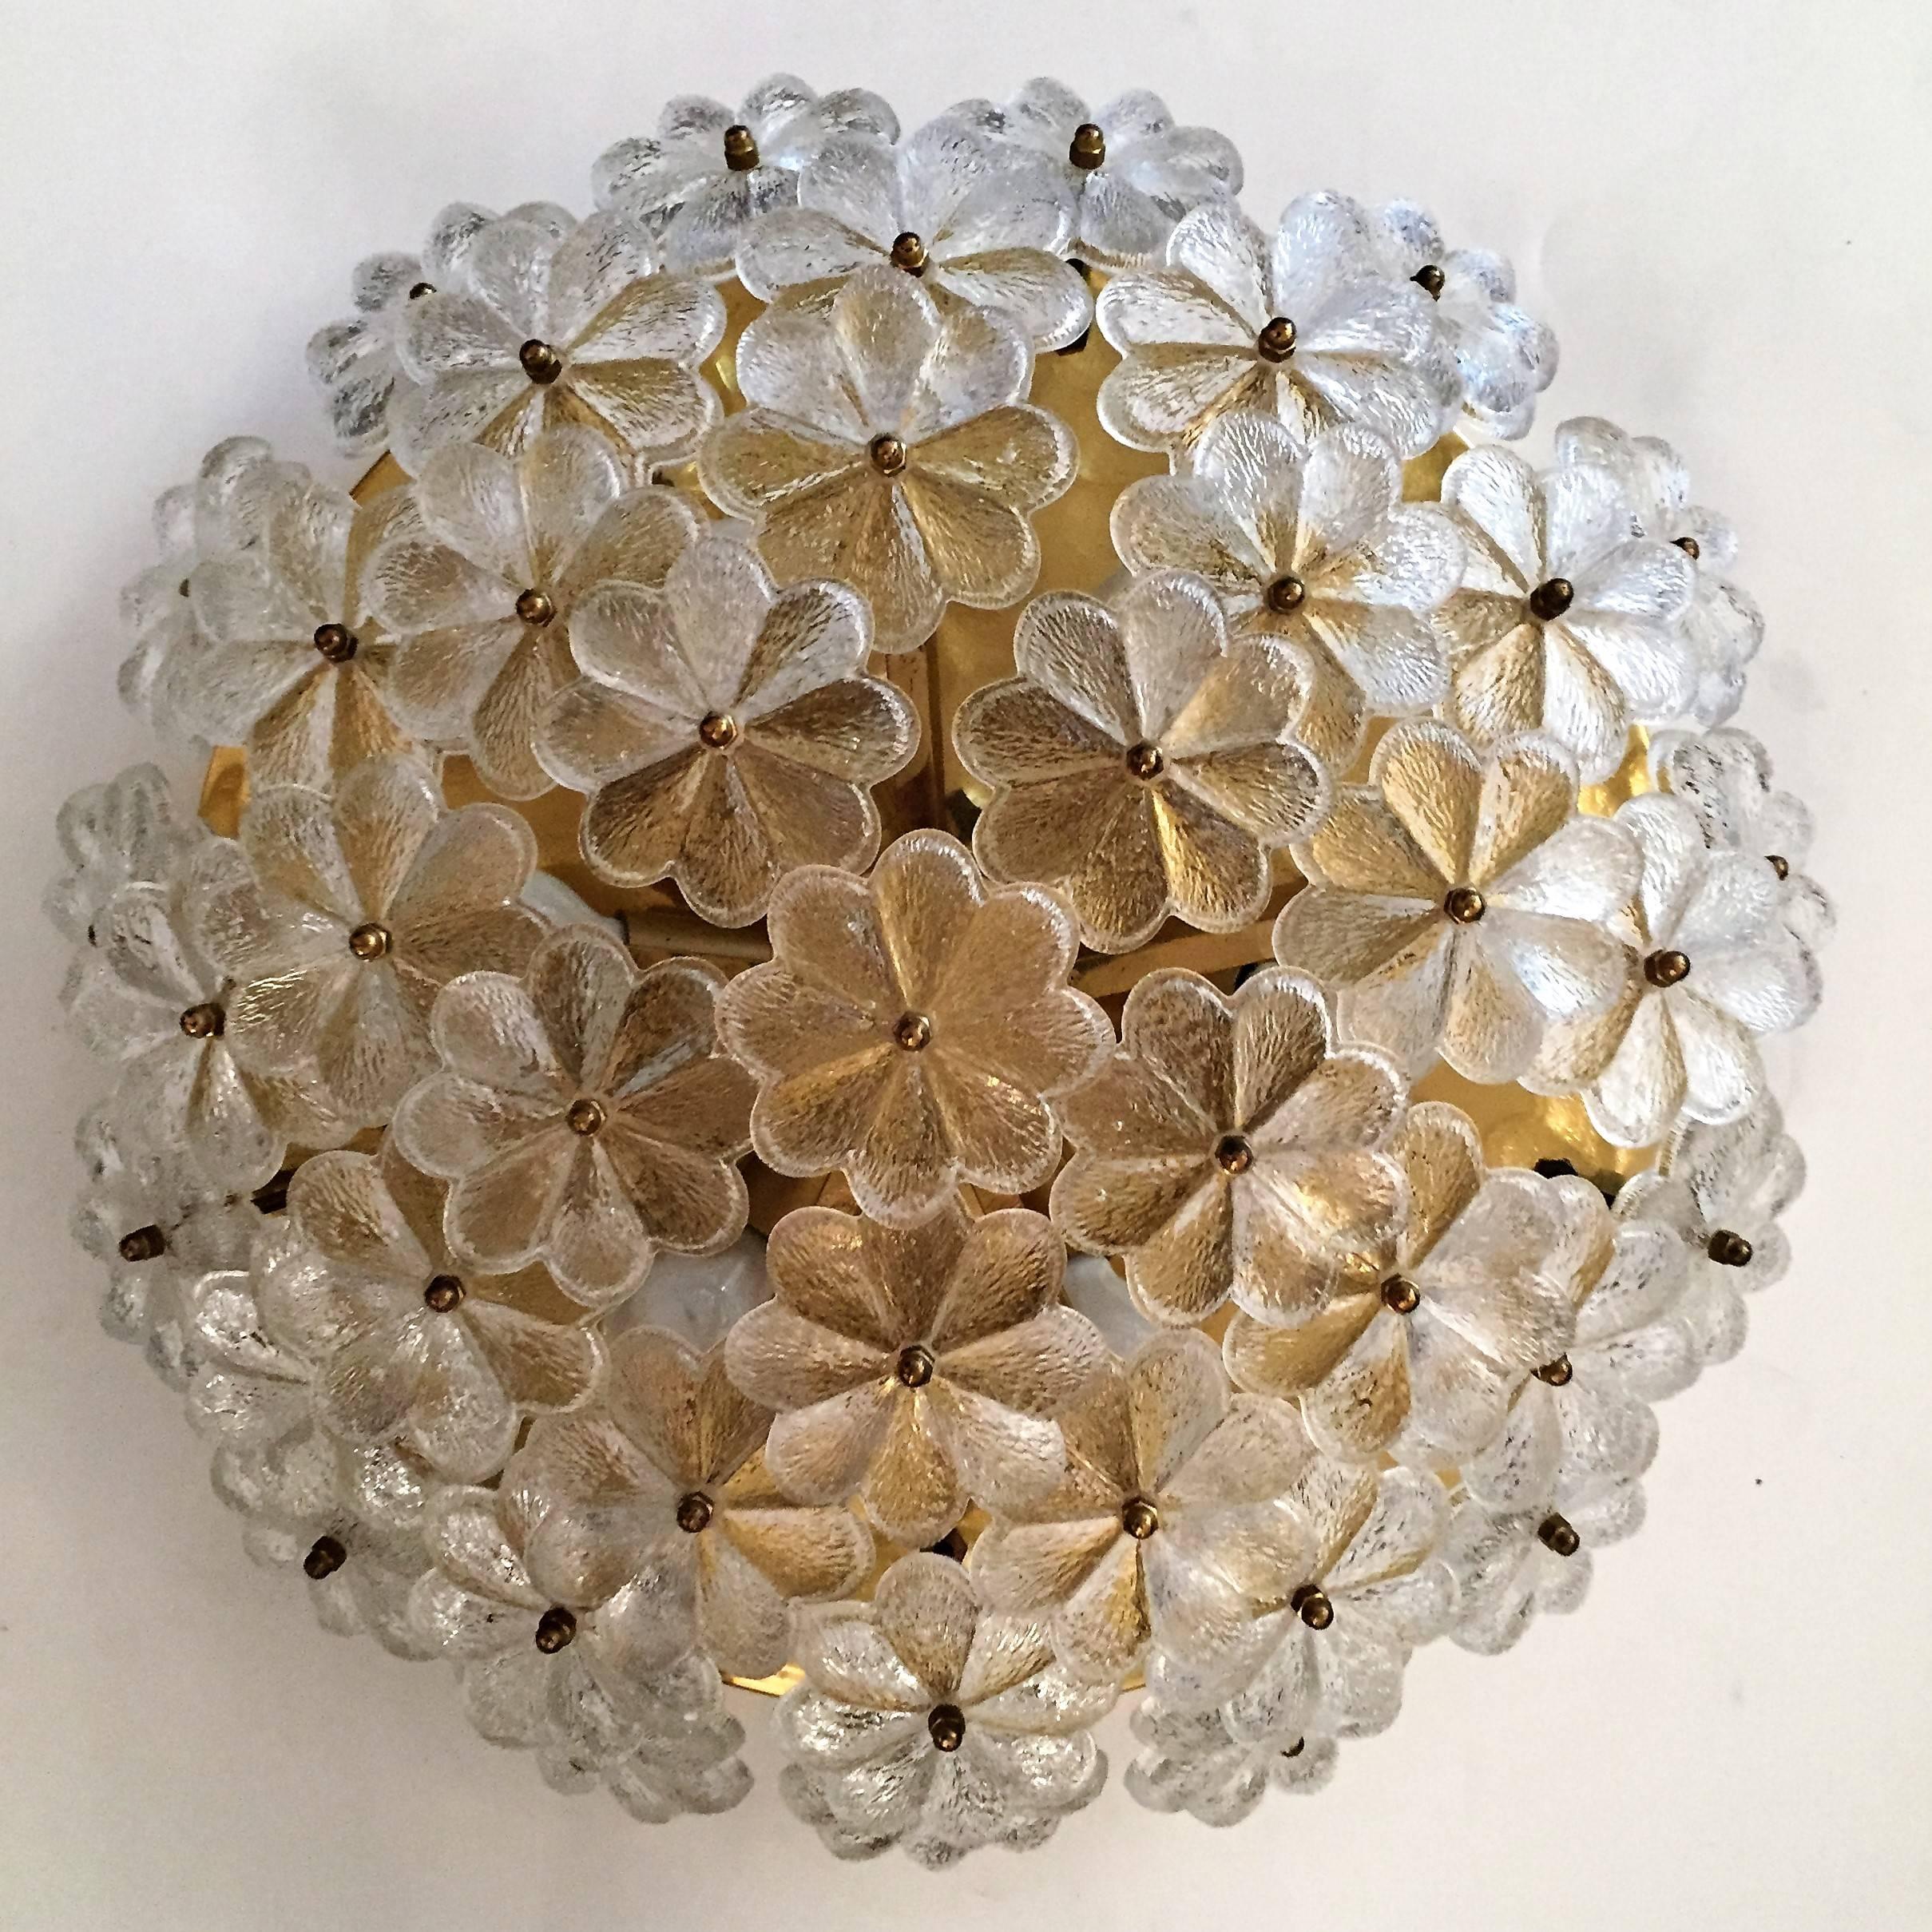 A wonderful 1960s Austrian flush ceiling light composed of a golden brass fixture holding 42 floral glass elements. Six-light sources. Newly rewired.